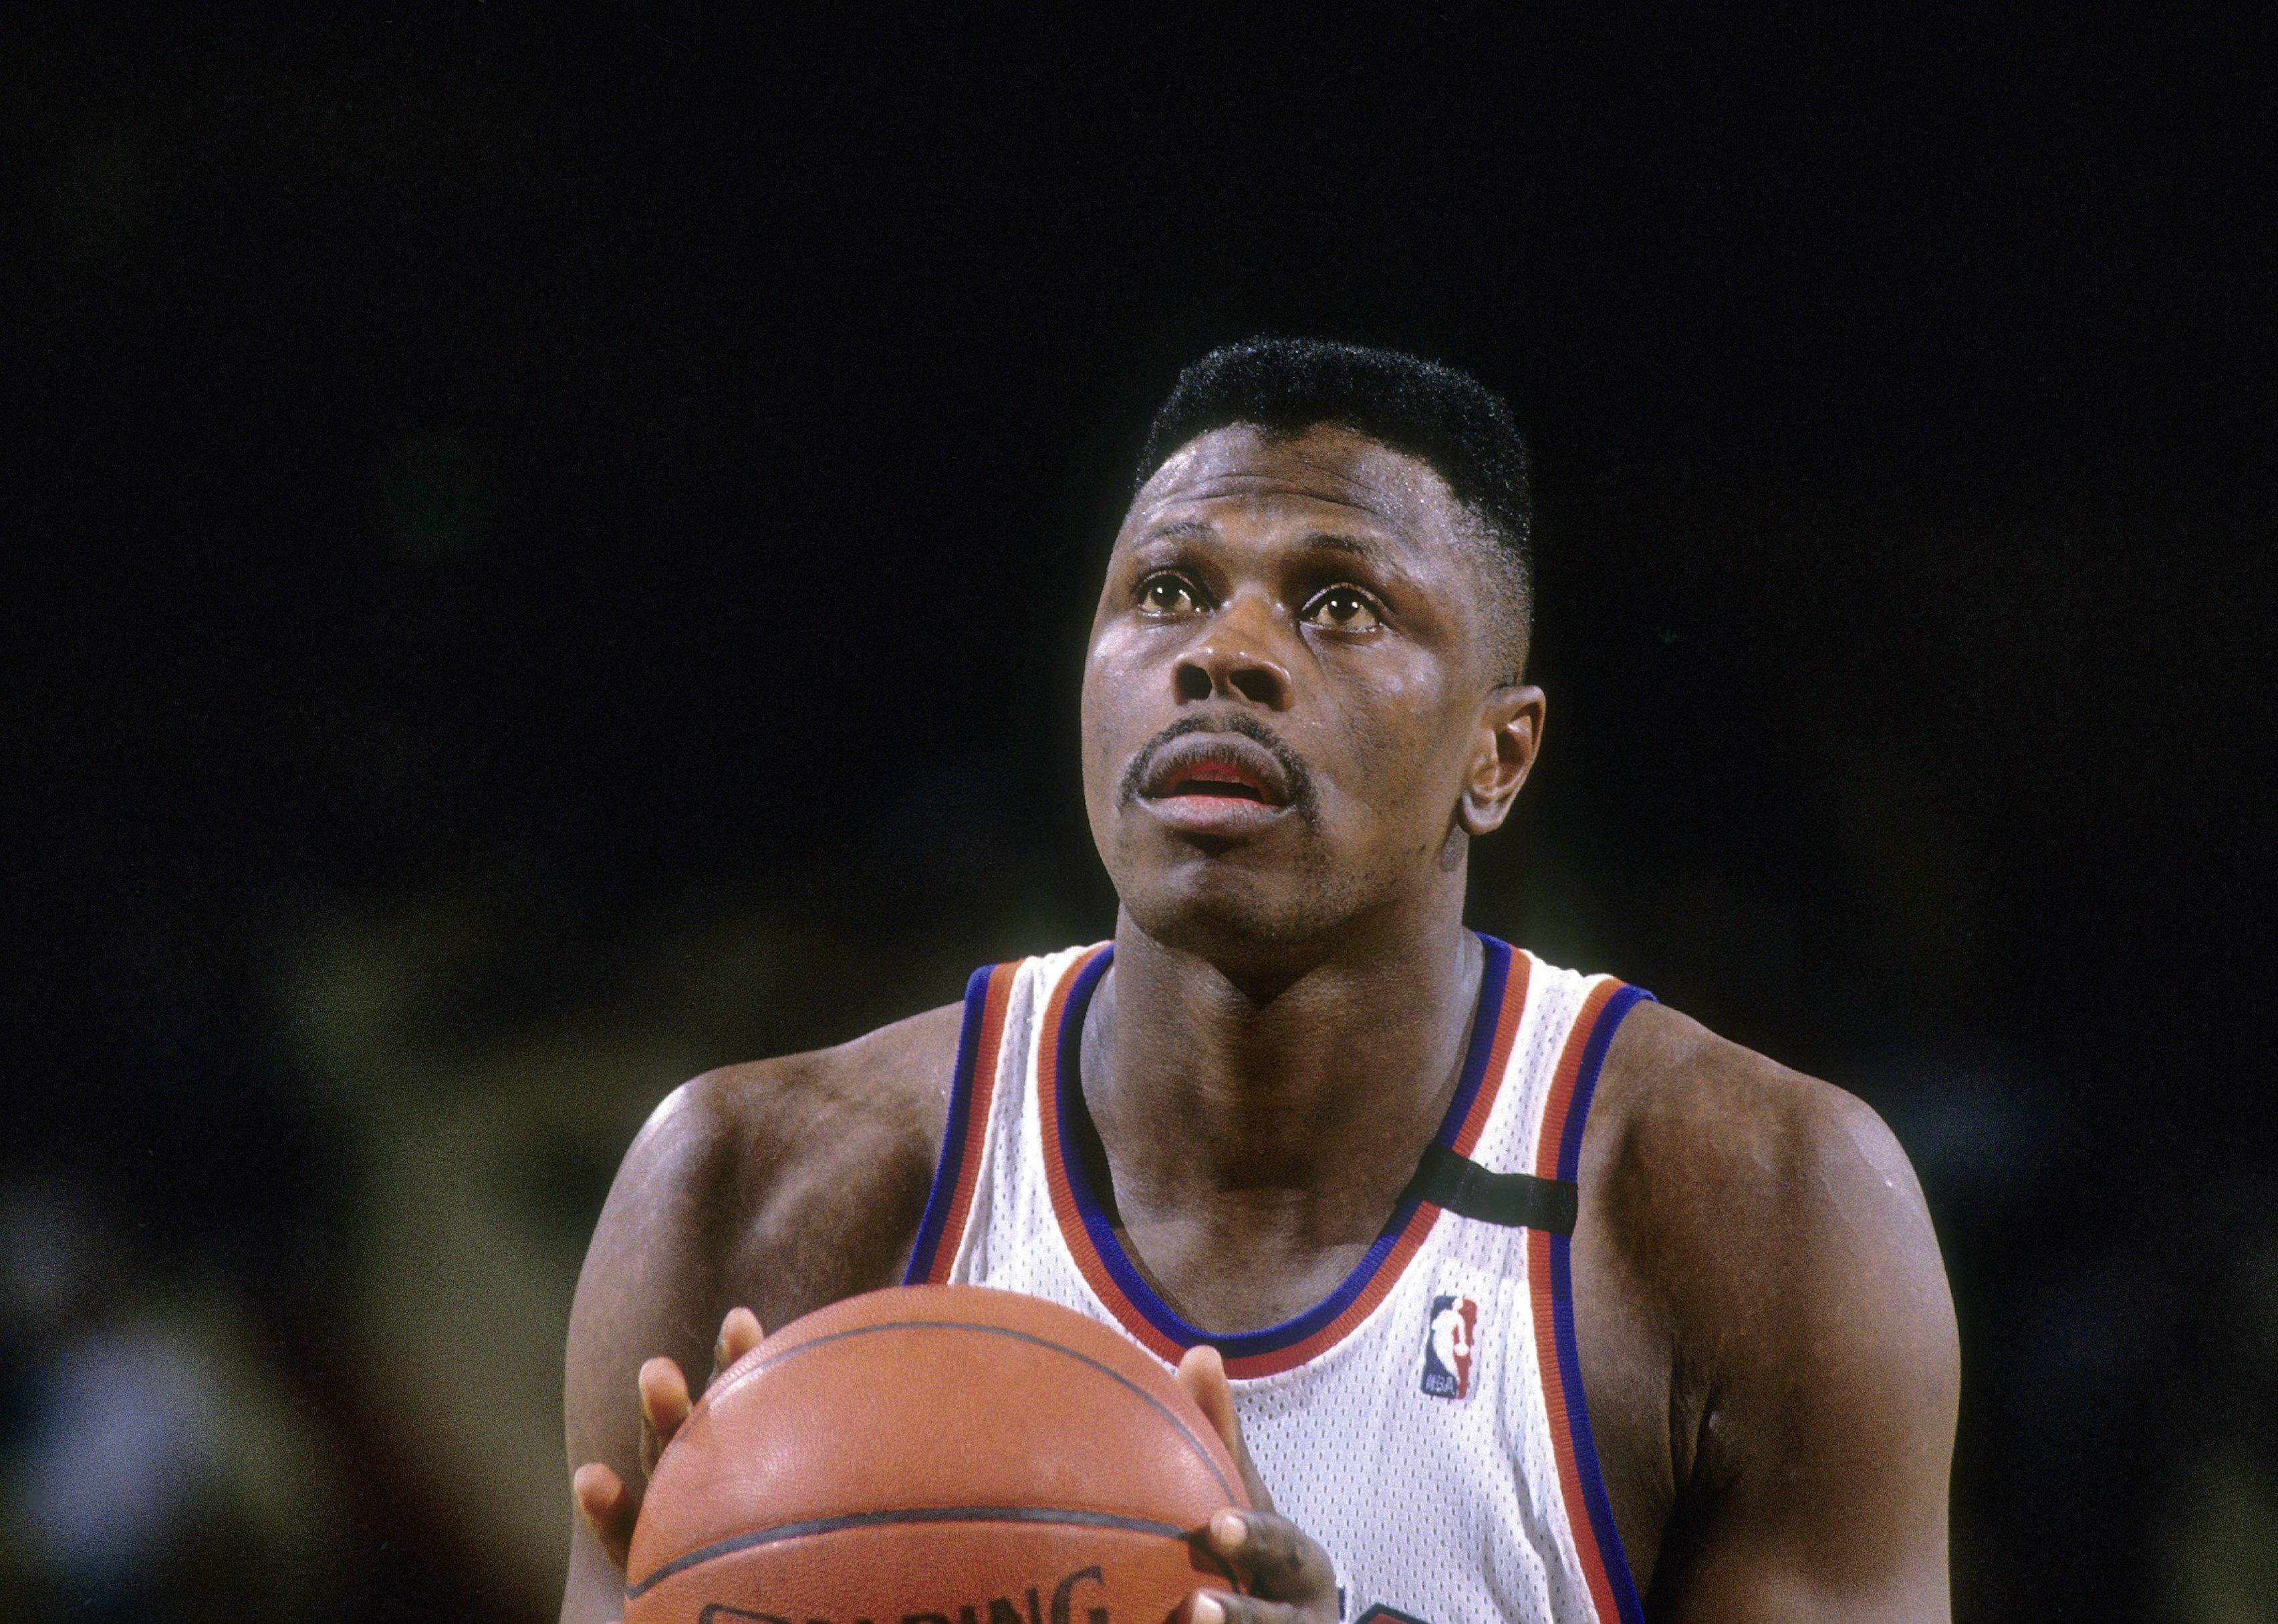 Patrick Ewing on the court during an NBA basketball game at Madison Square Garden.